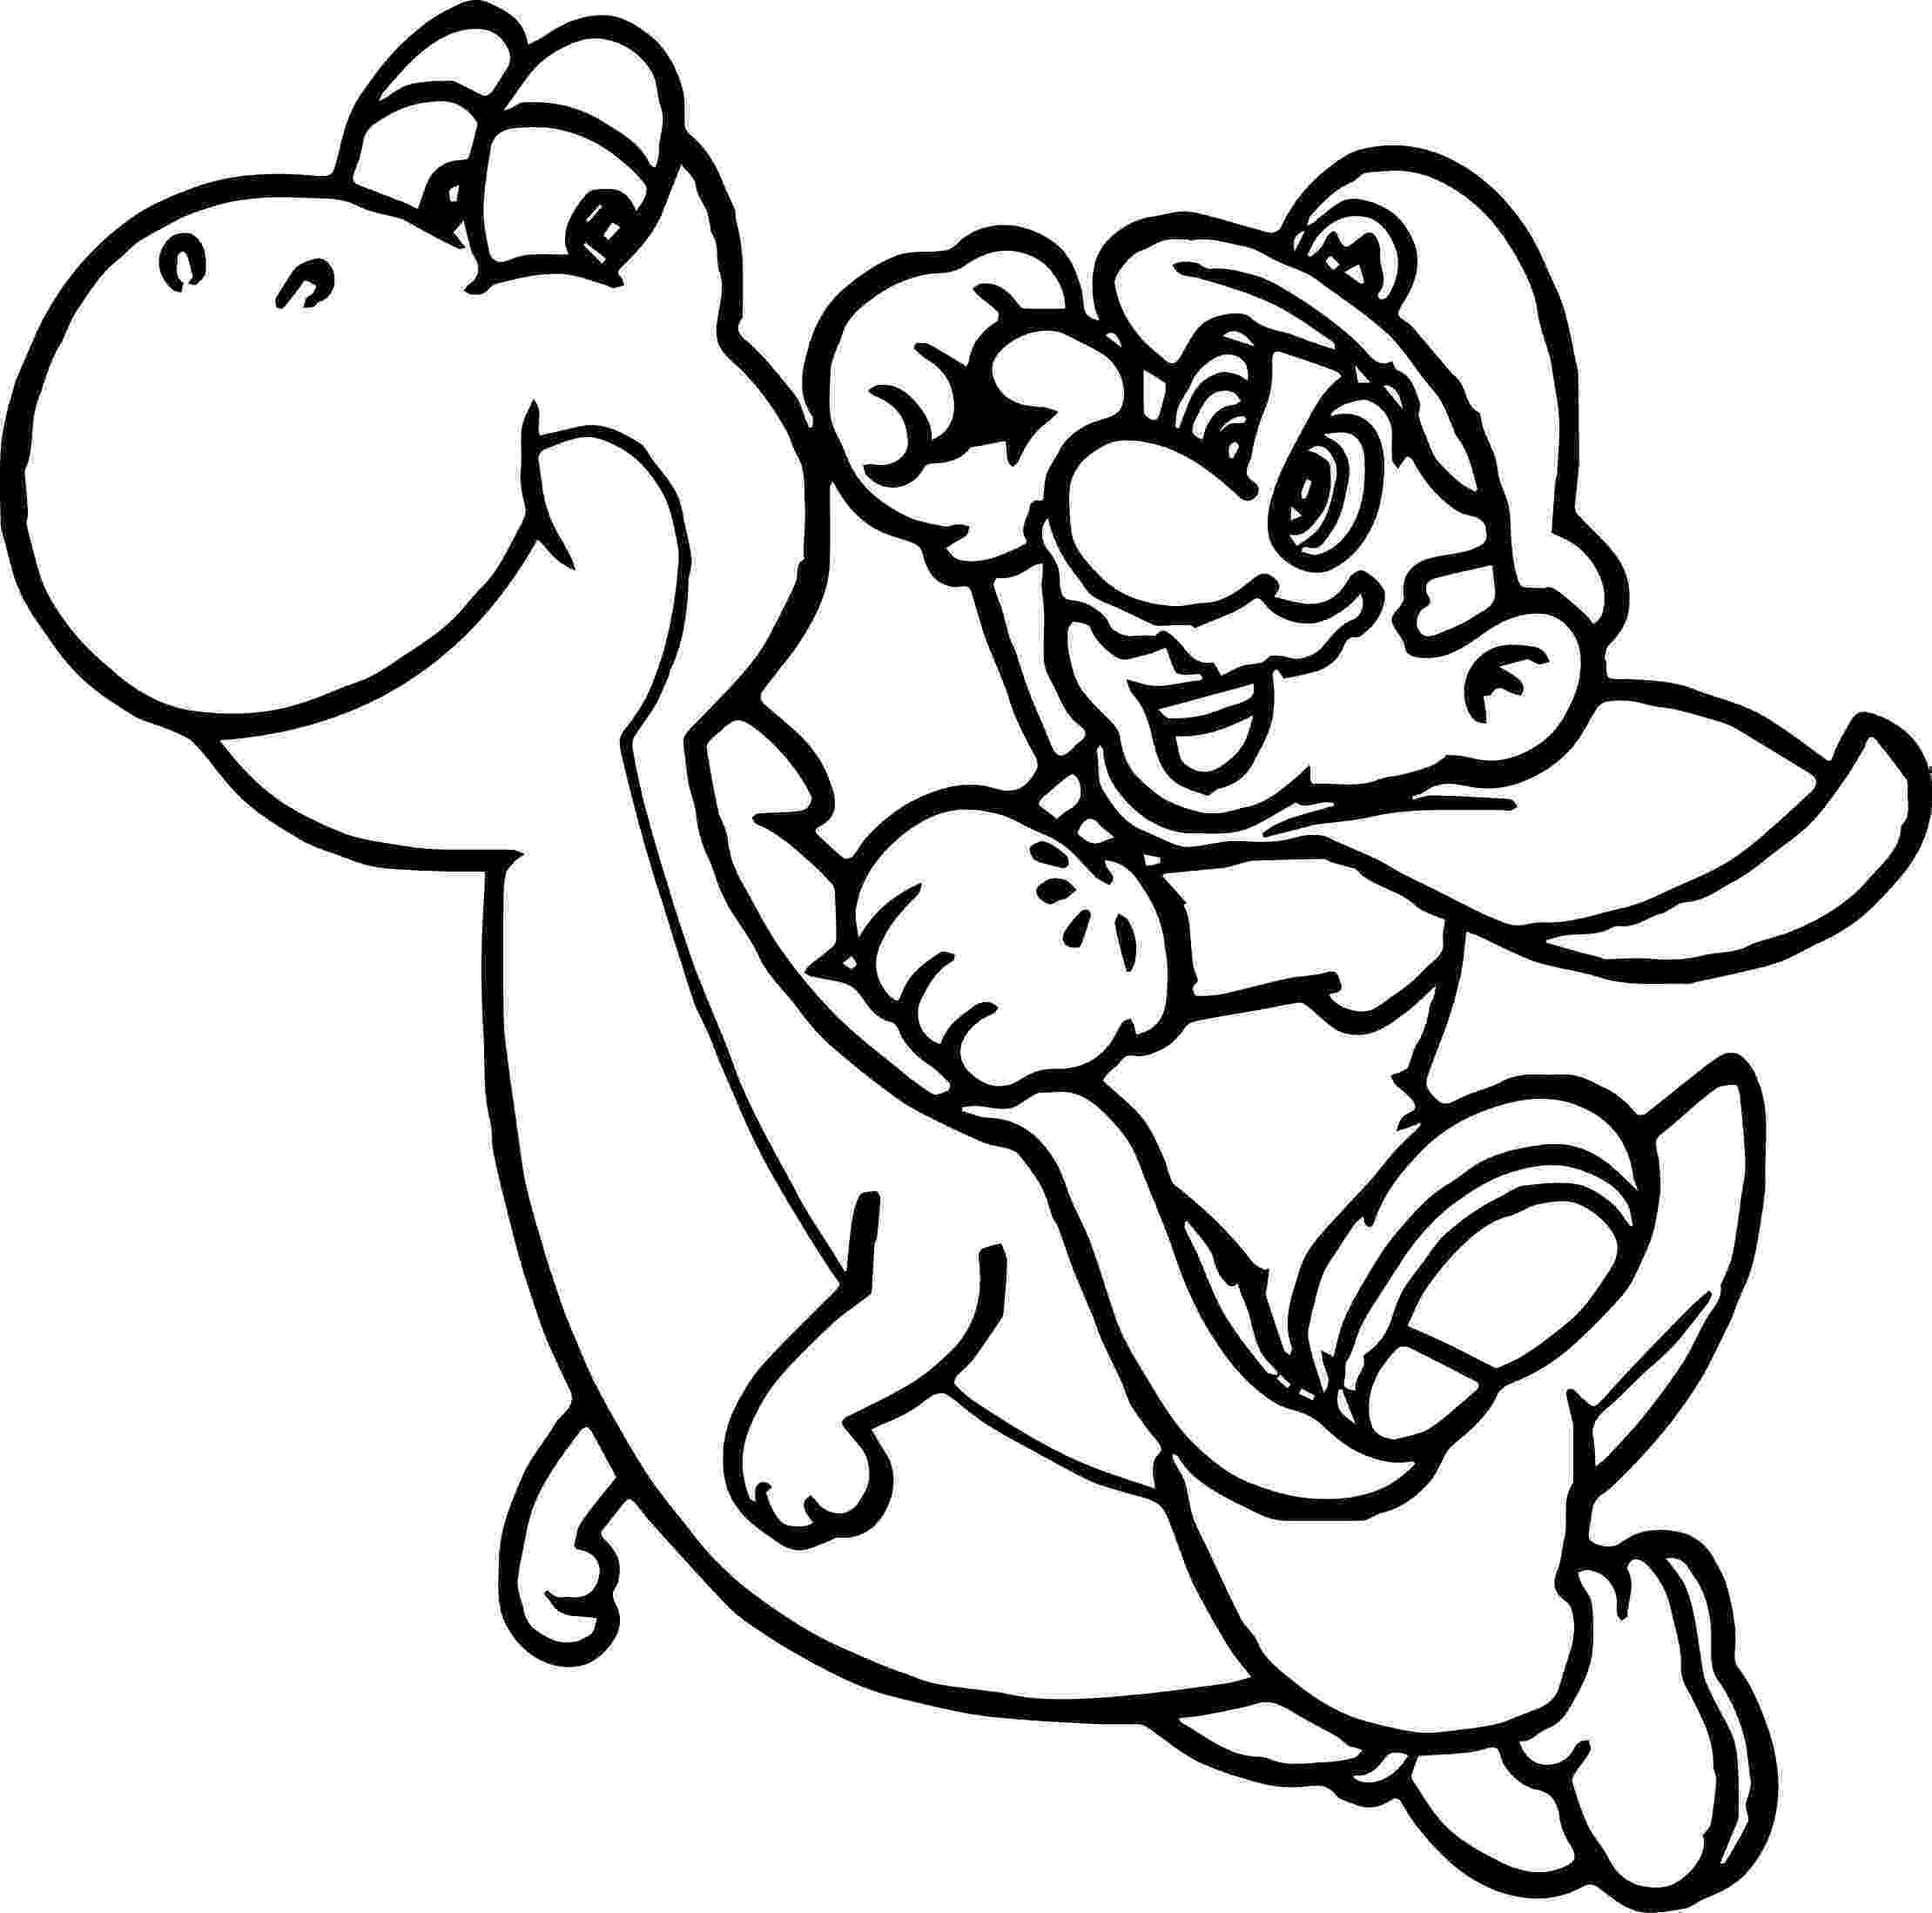 mario pictures free printable mario coloring pages for kids super mario mario pictures 